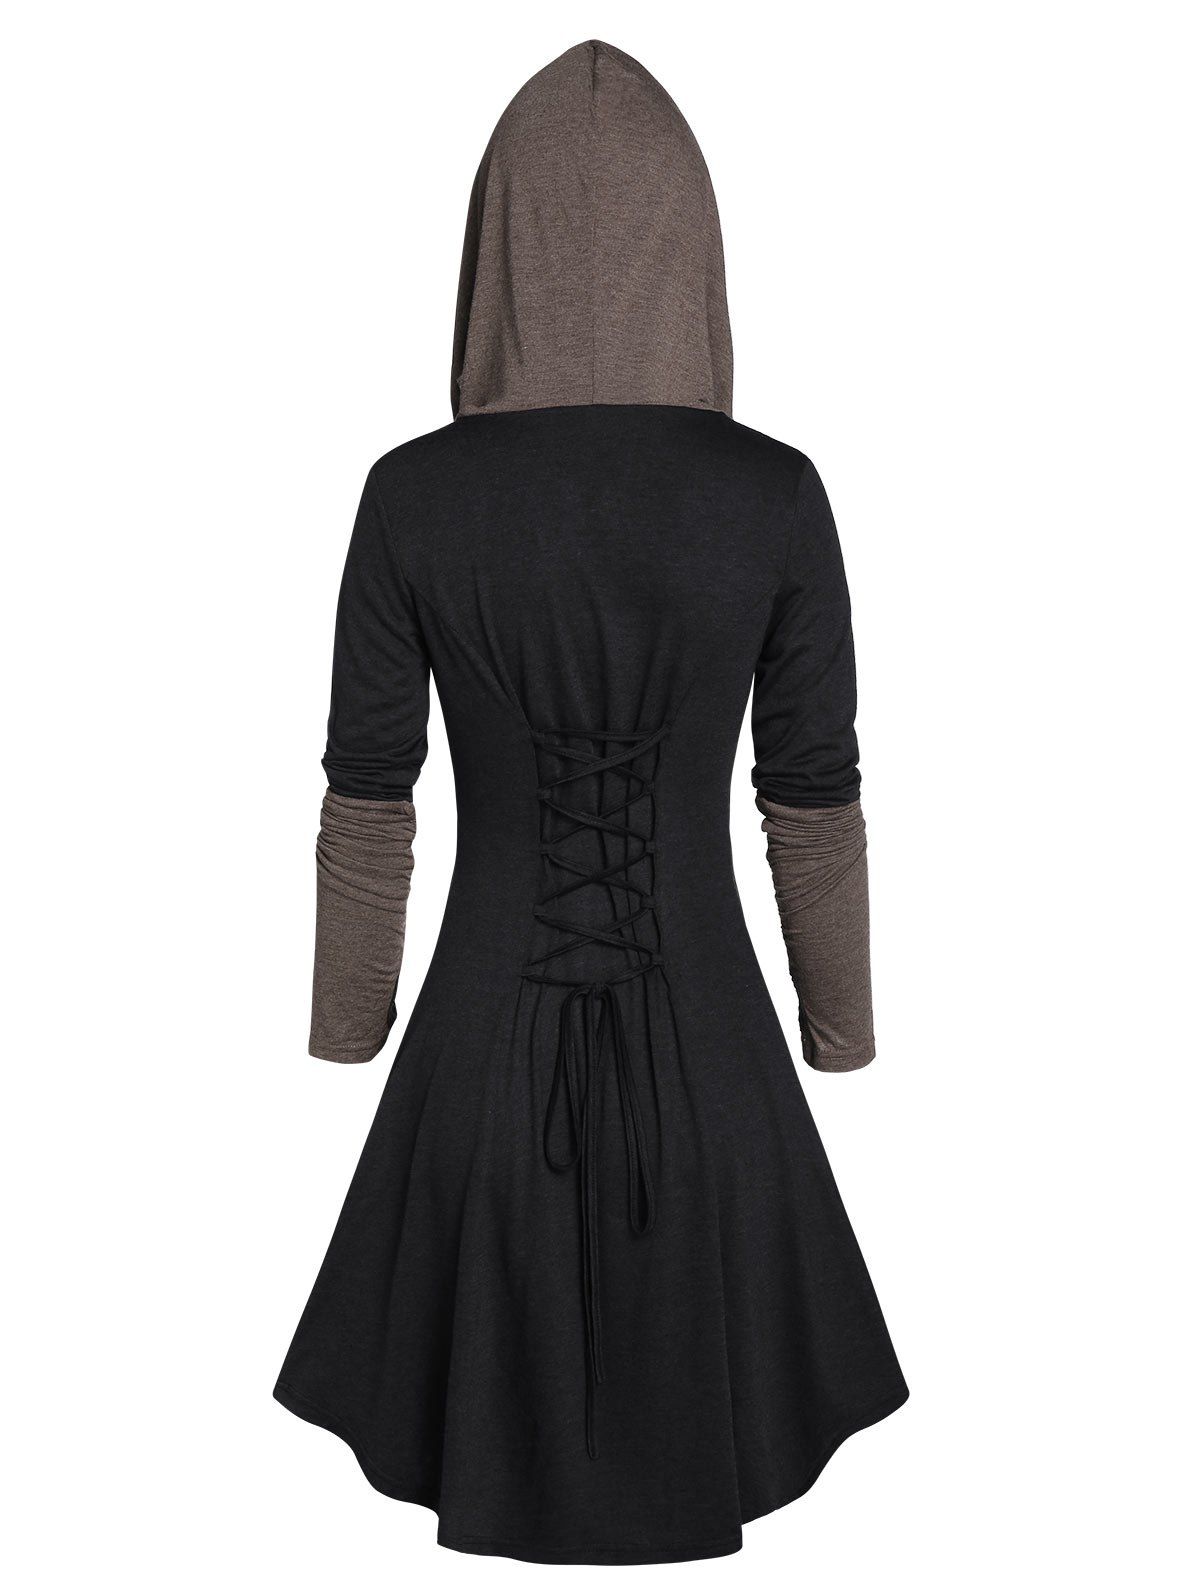 [35% OFF] 2020 Hooded Glove Sleeve Lace-up Contrast Flare Dress In DARK ...